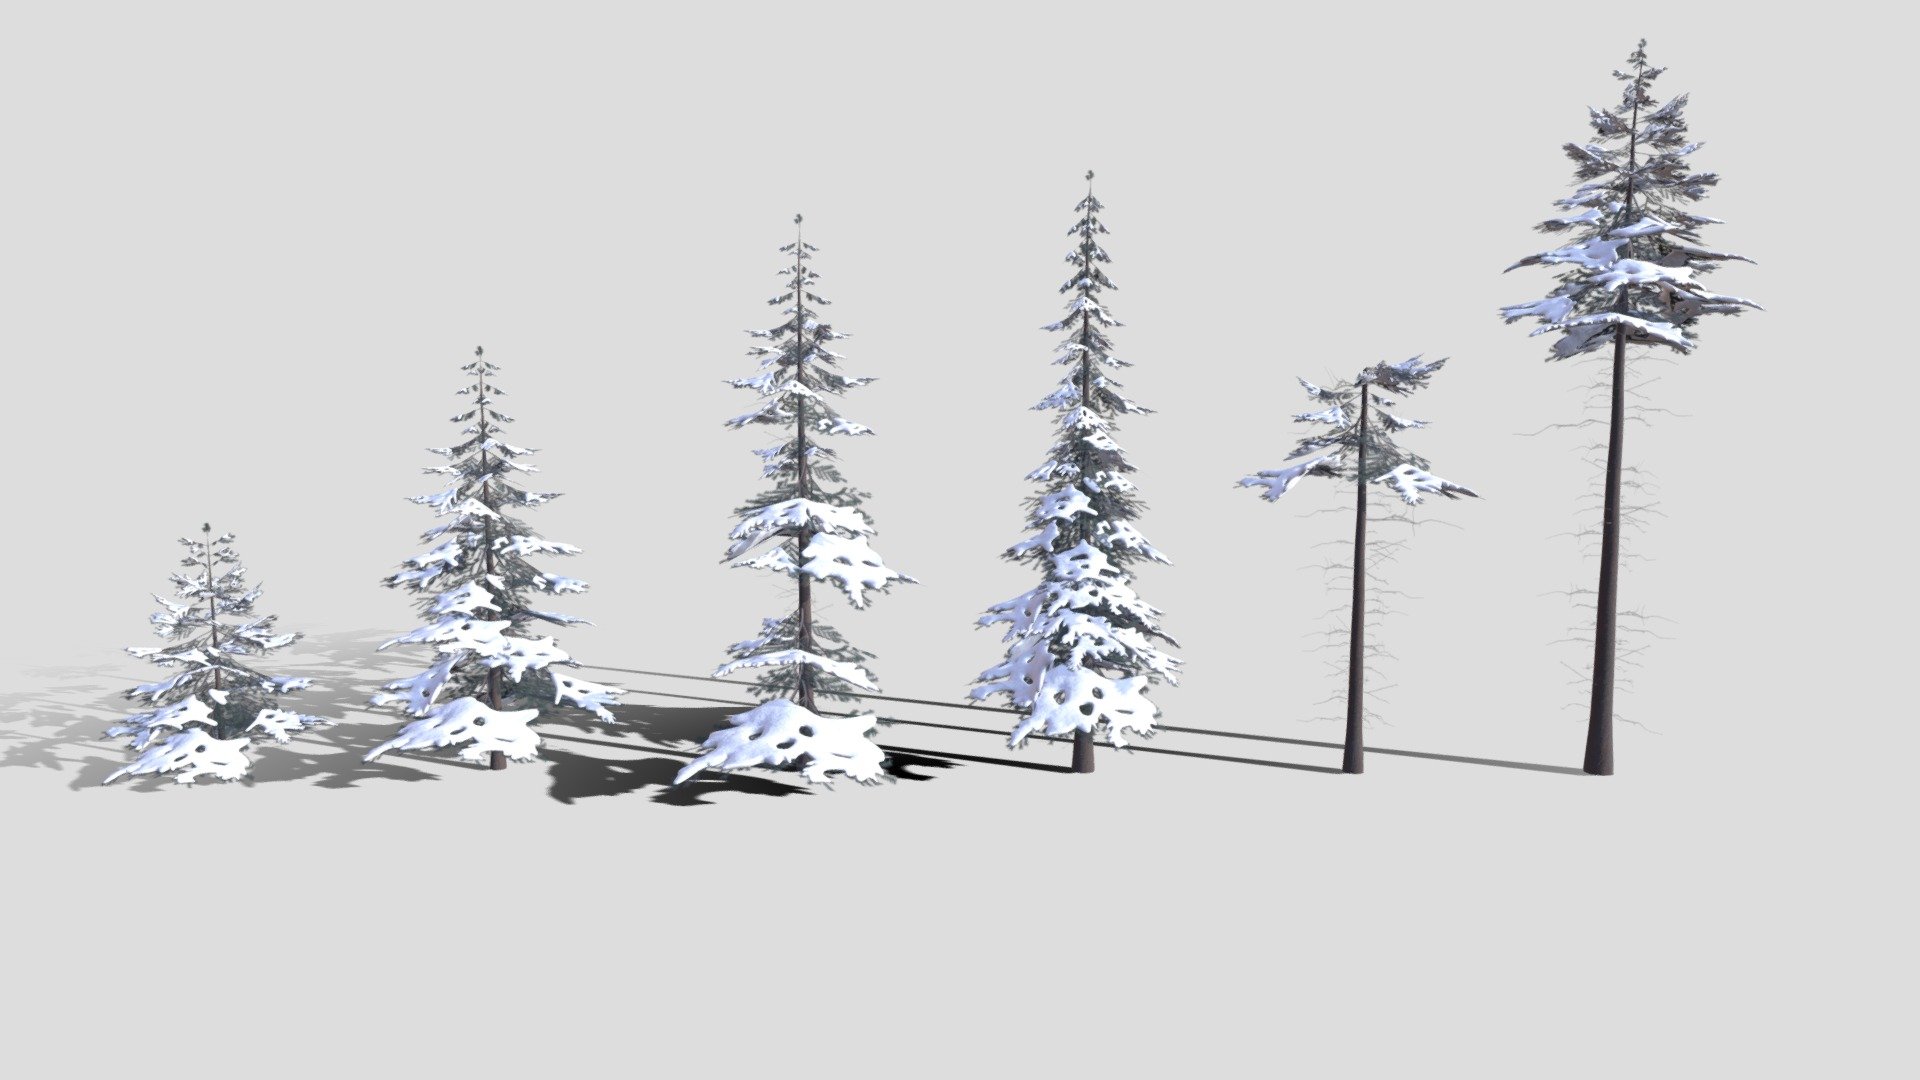 Hi all,

This is PBR Low Poly Snowy Spruce Tree Pack. The file includes 6 models in real world scale (8m - 24m).

The product has 154491 polygons.

It comes in following formats:
.blend
.fbx
.obj
.dae

The blender file has the shaders set up, so it's ready to render using Cycles and Eevee.
It also comes with set of 4K .png maps:
base color
roughness
normal
opacity
translucency - Low Poly Snowy Spruce Tree Pack - Buy Royalty Free 3D model by kambur 3d model